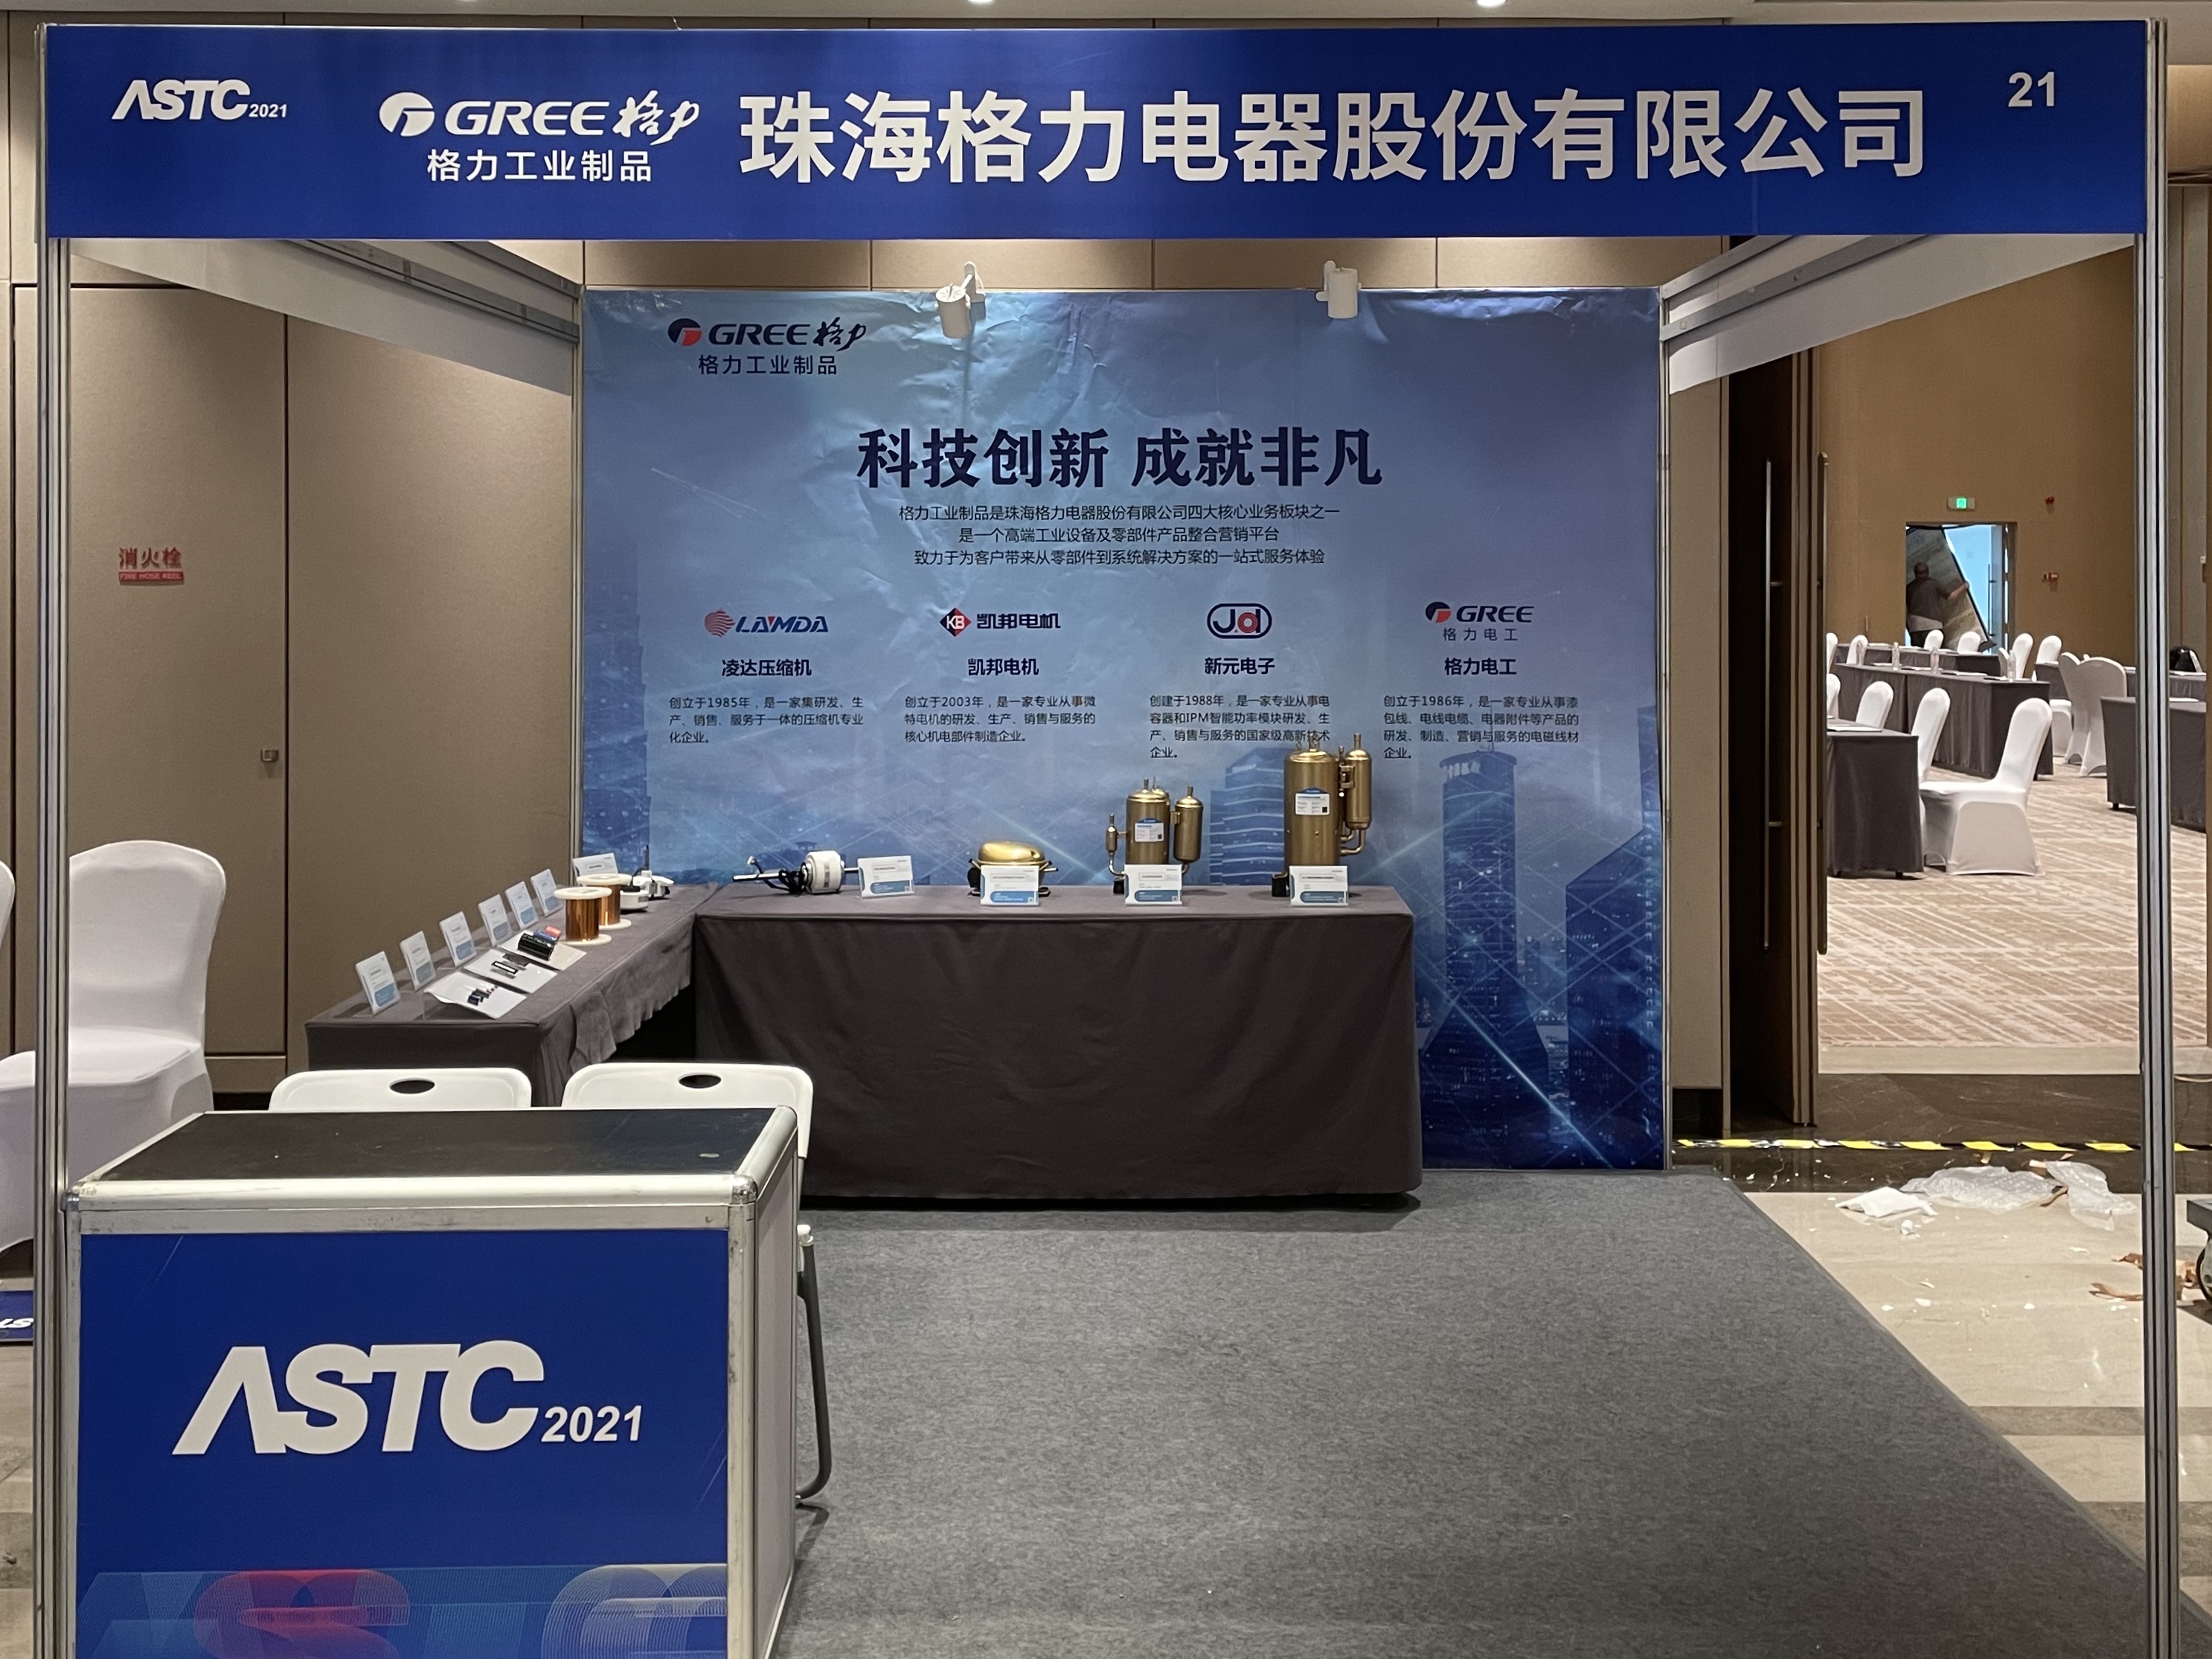 ASTC 2021 | Innovative Technology Empowers Smart Home Appliances